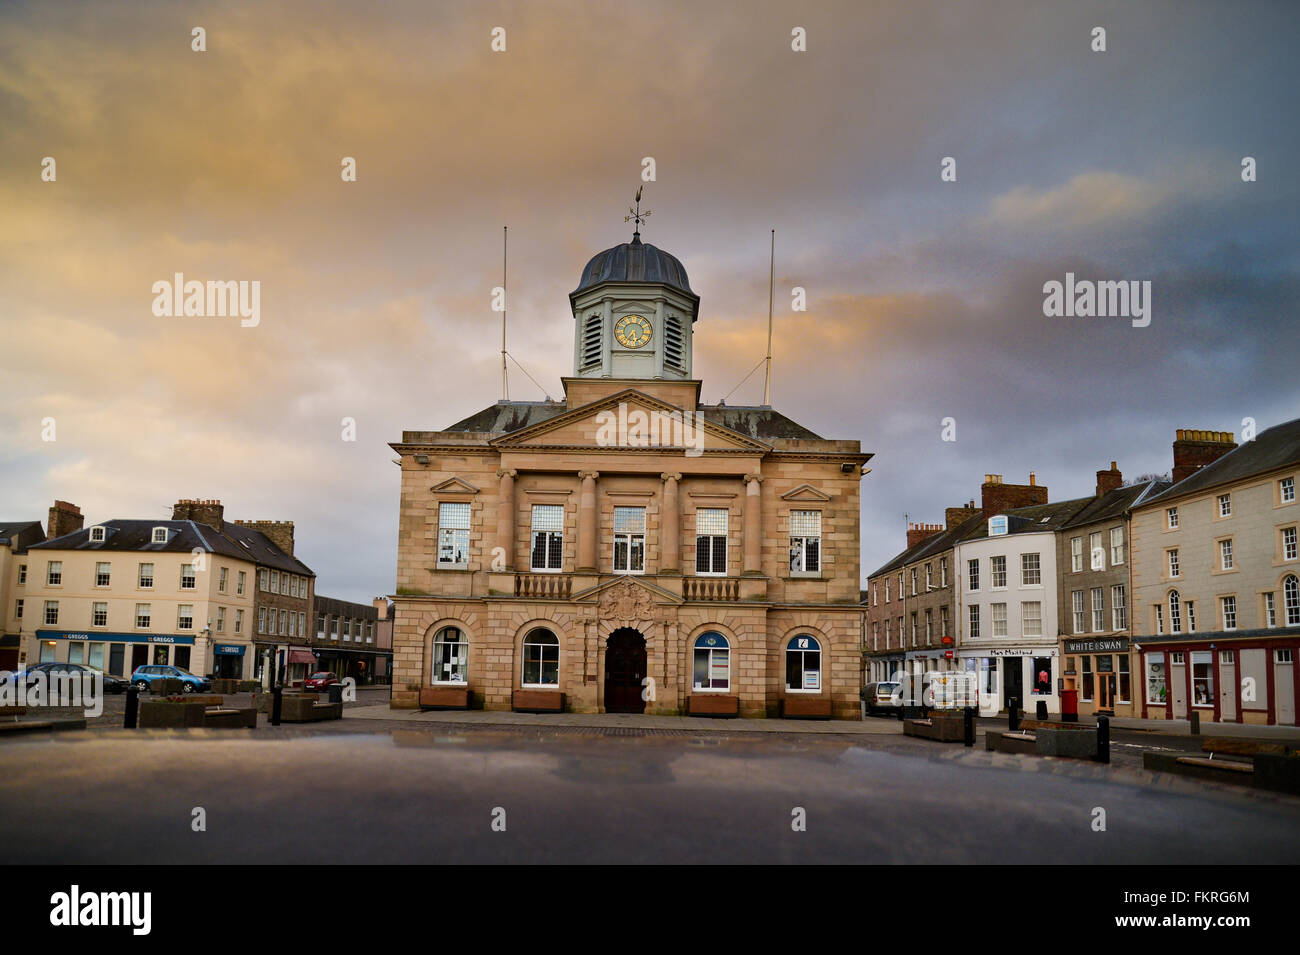 The Square and Town Hall, in the small Scottish town of Kelso in the Borderlands of Scotland and England. Stock Photo